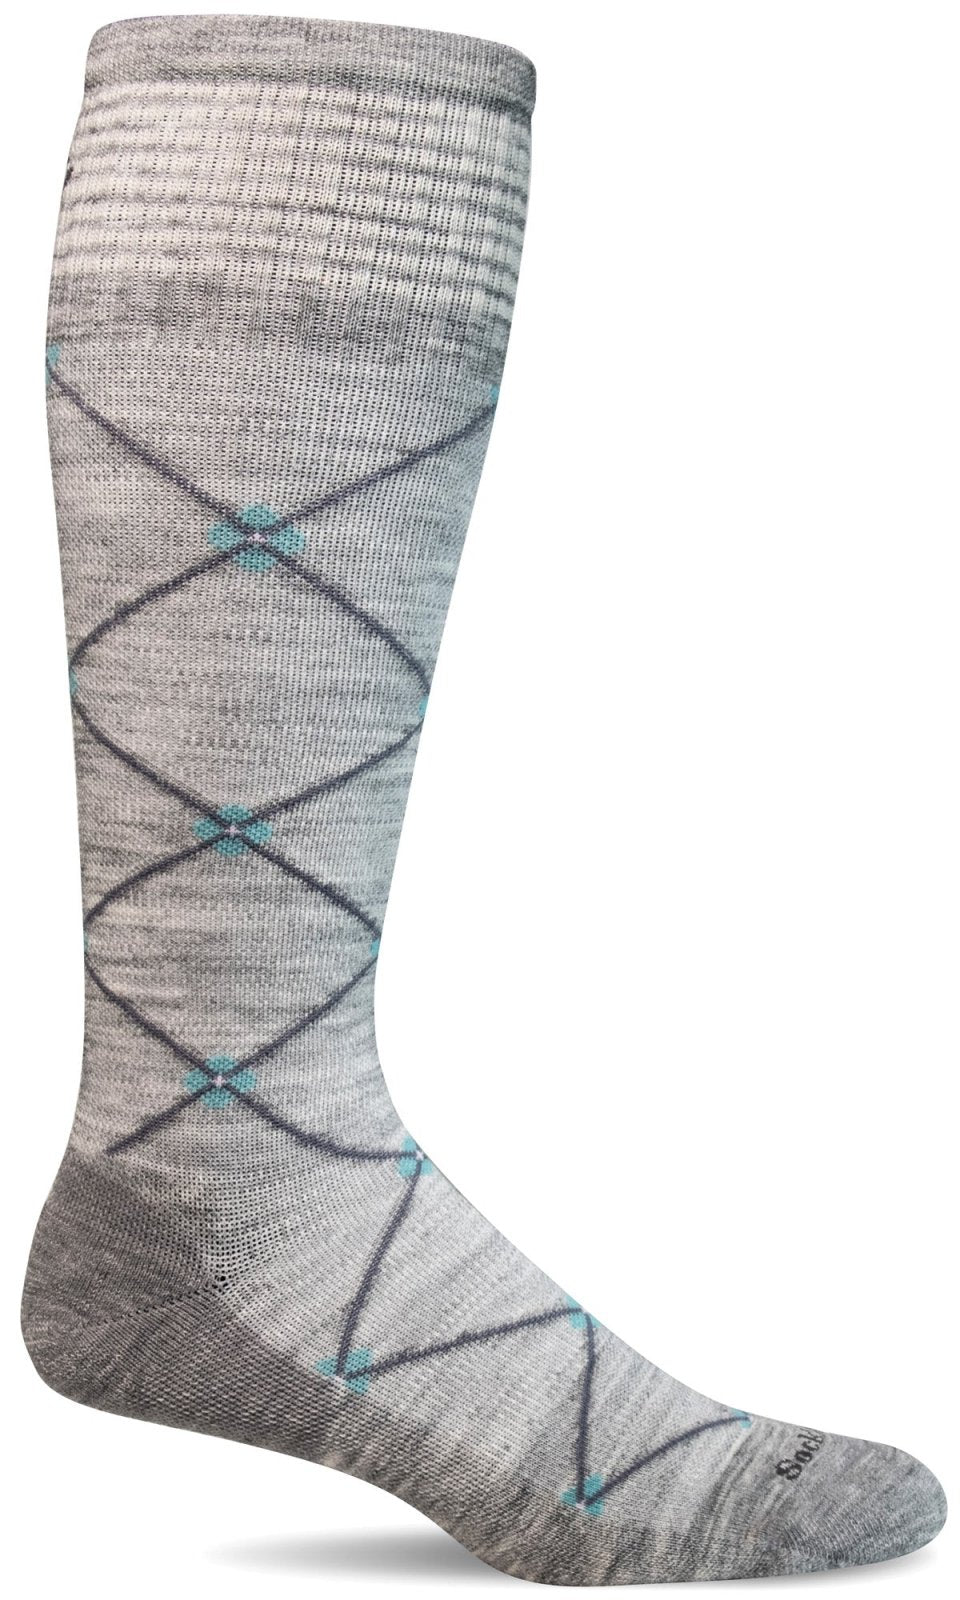 Women's Elevation | Firm Graduated Compression Socks - Merino Wool Lifestyle Compression - Sockwell